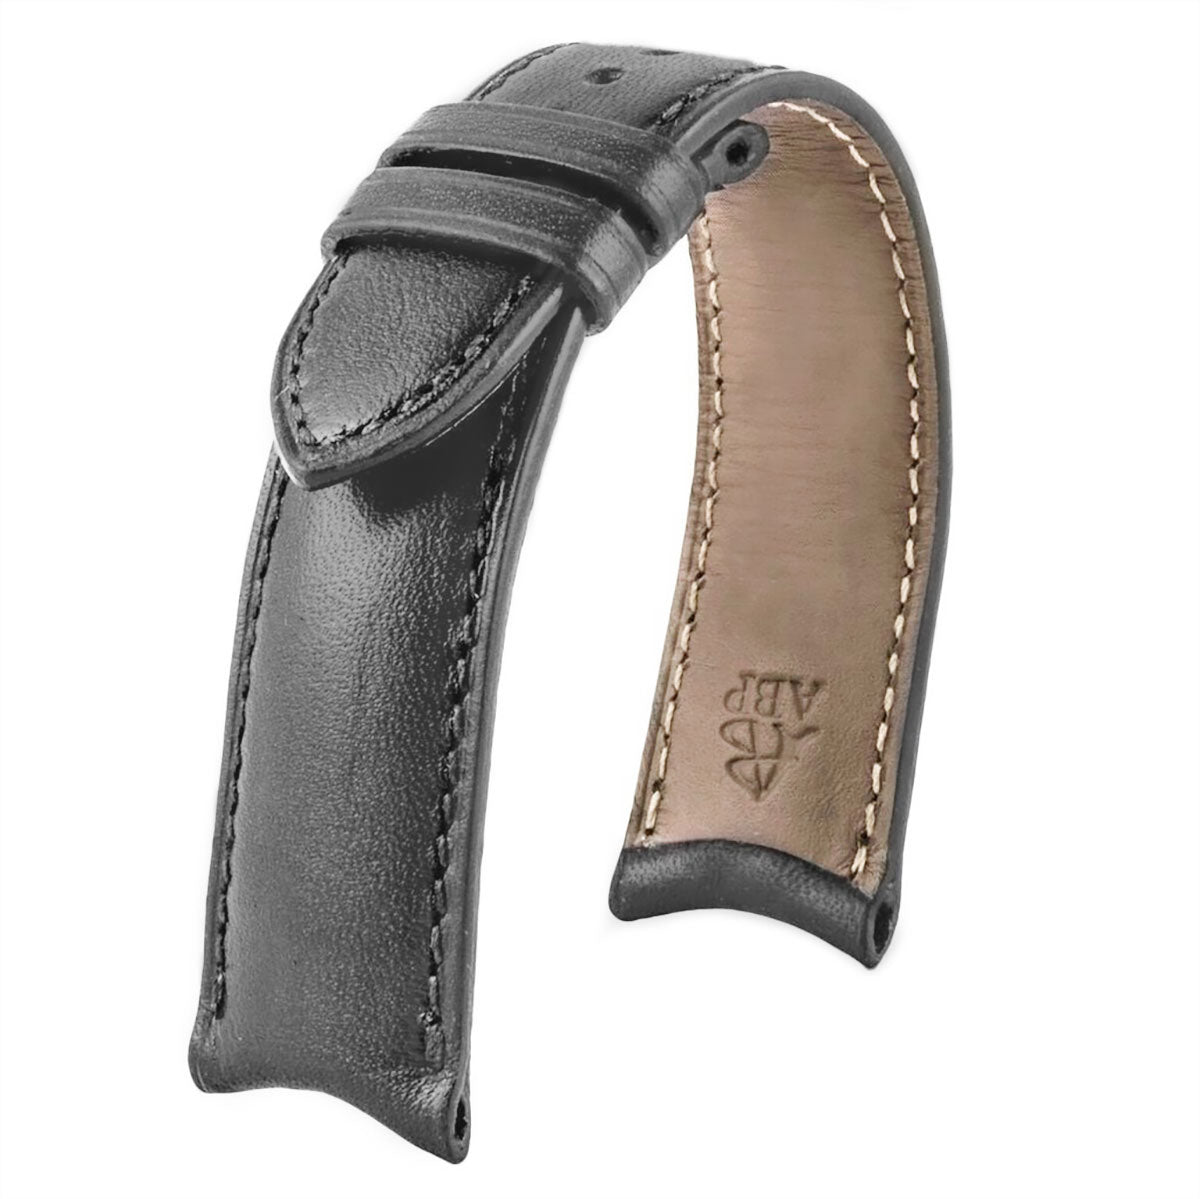 Curved ends - Leather watch strap - Alligator (black, brown, grey, blue) –  ABP Concept